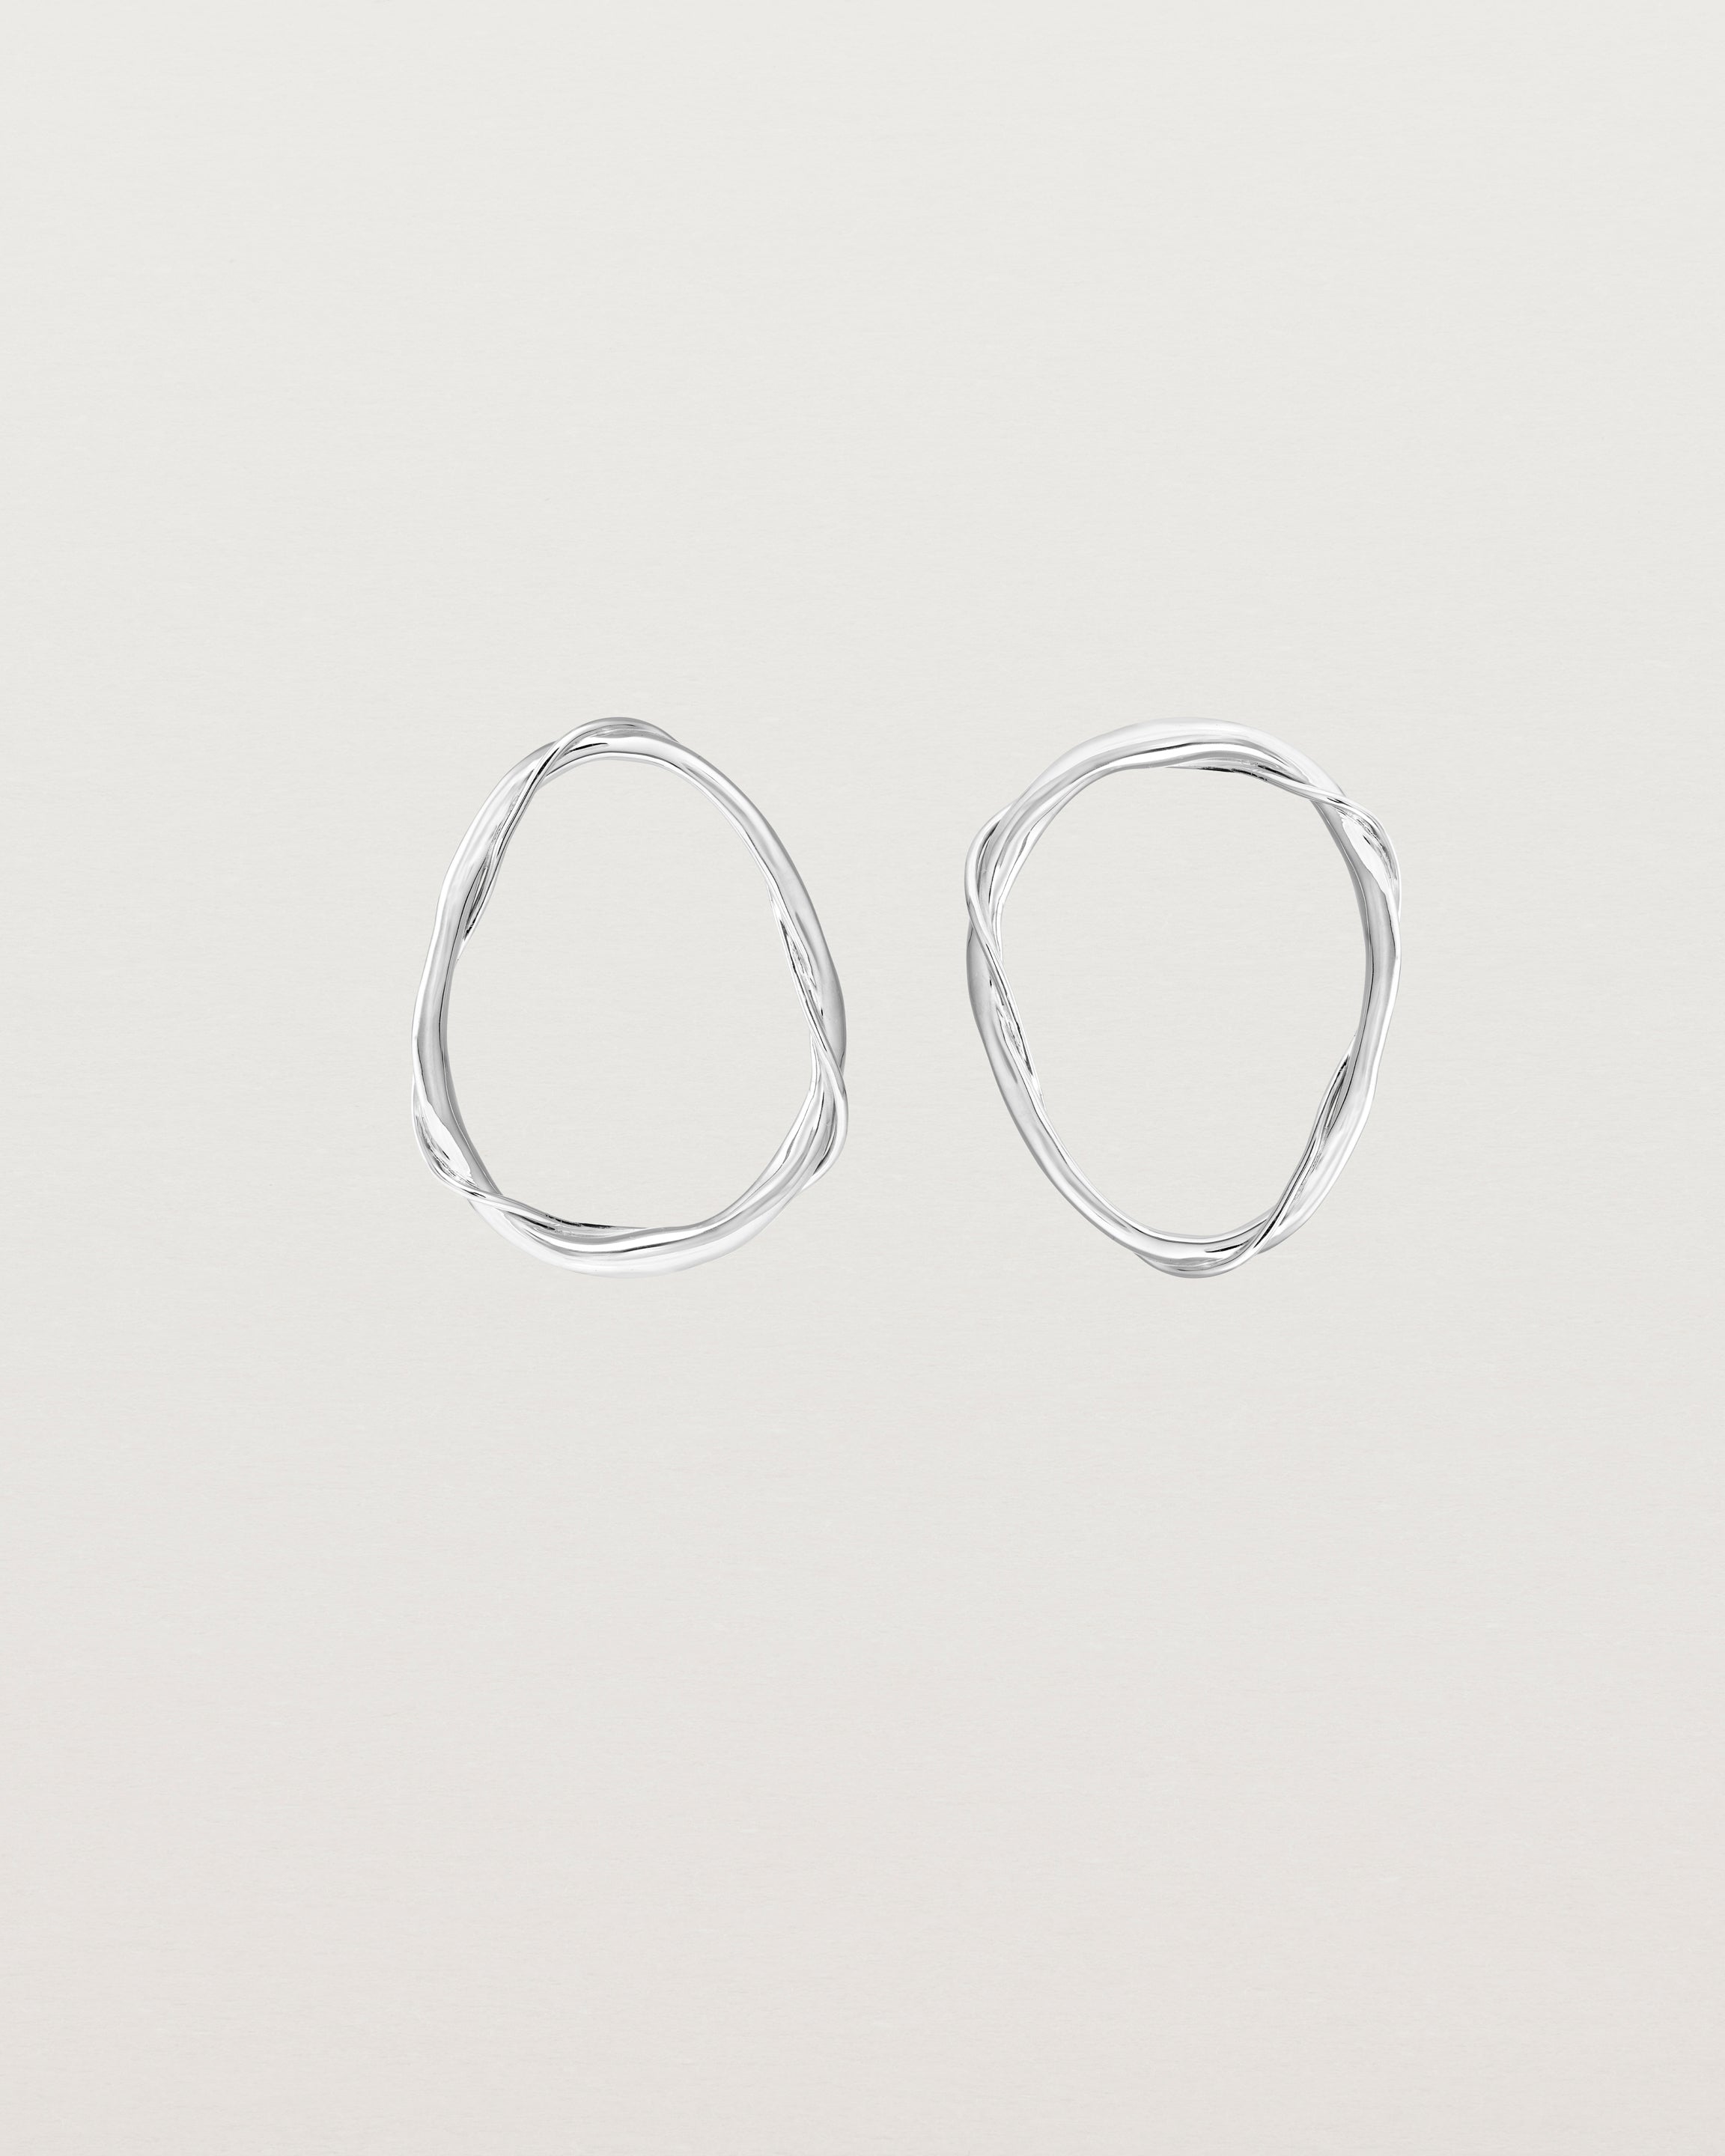 Front view of the Dalí Earrings in sterling silver.